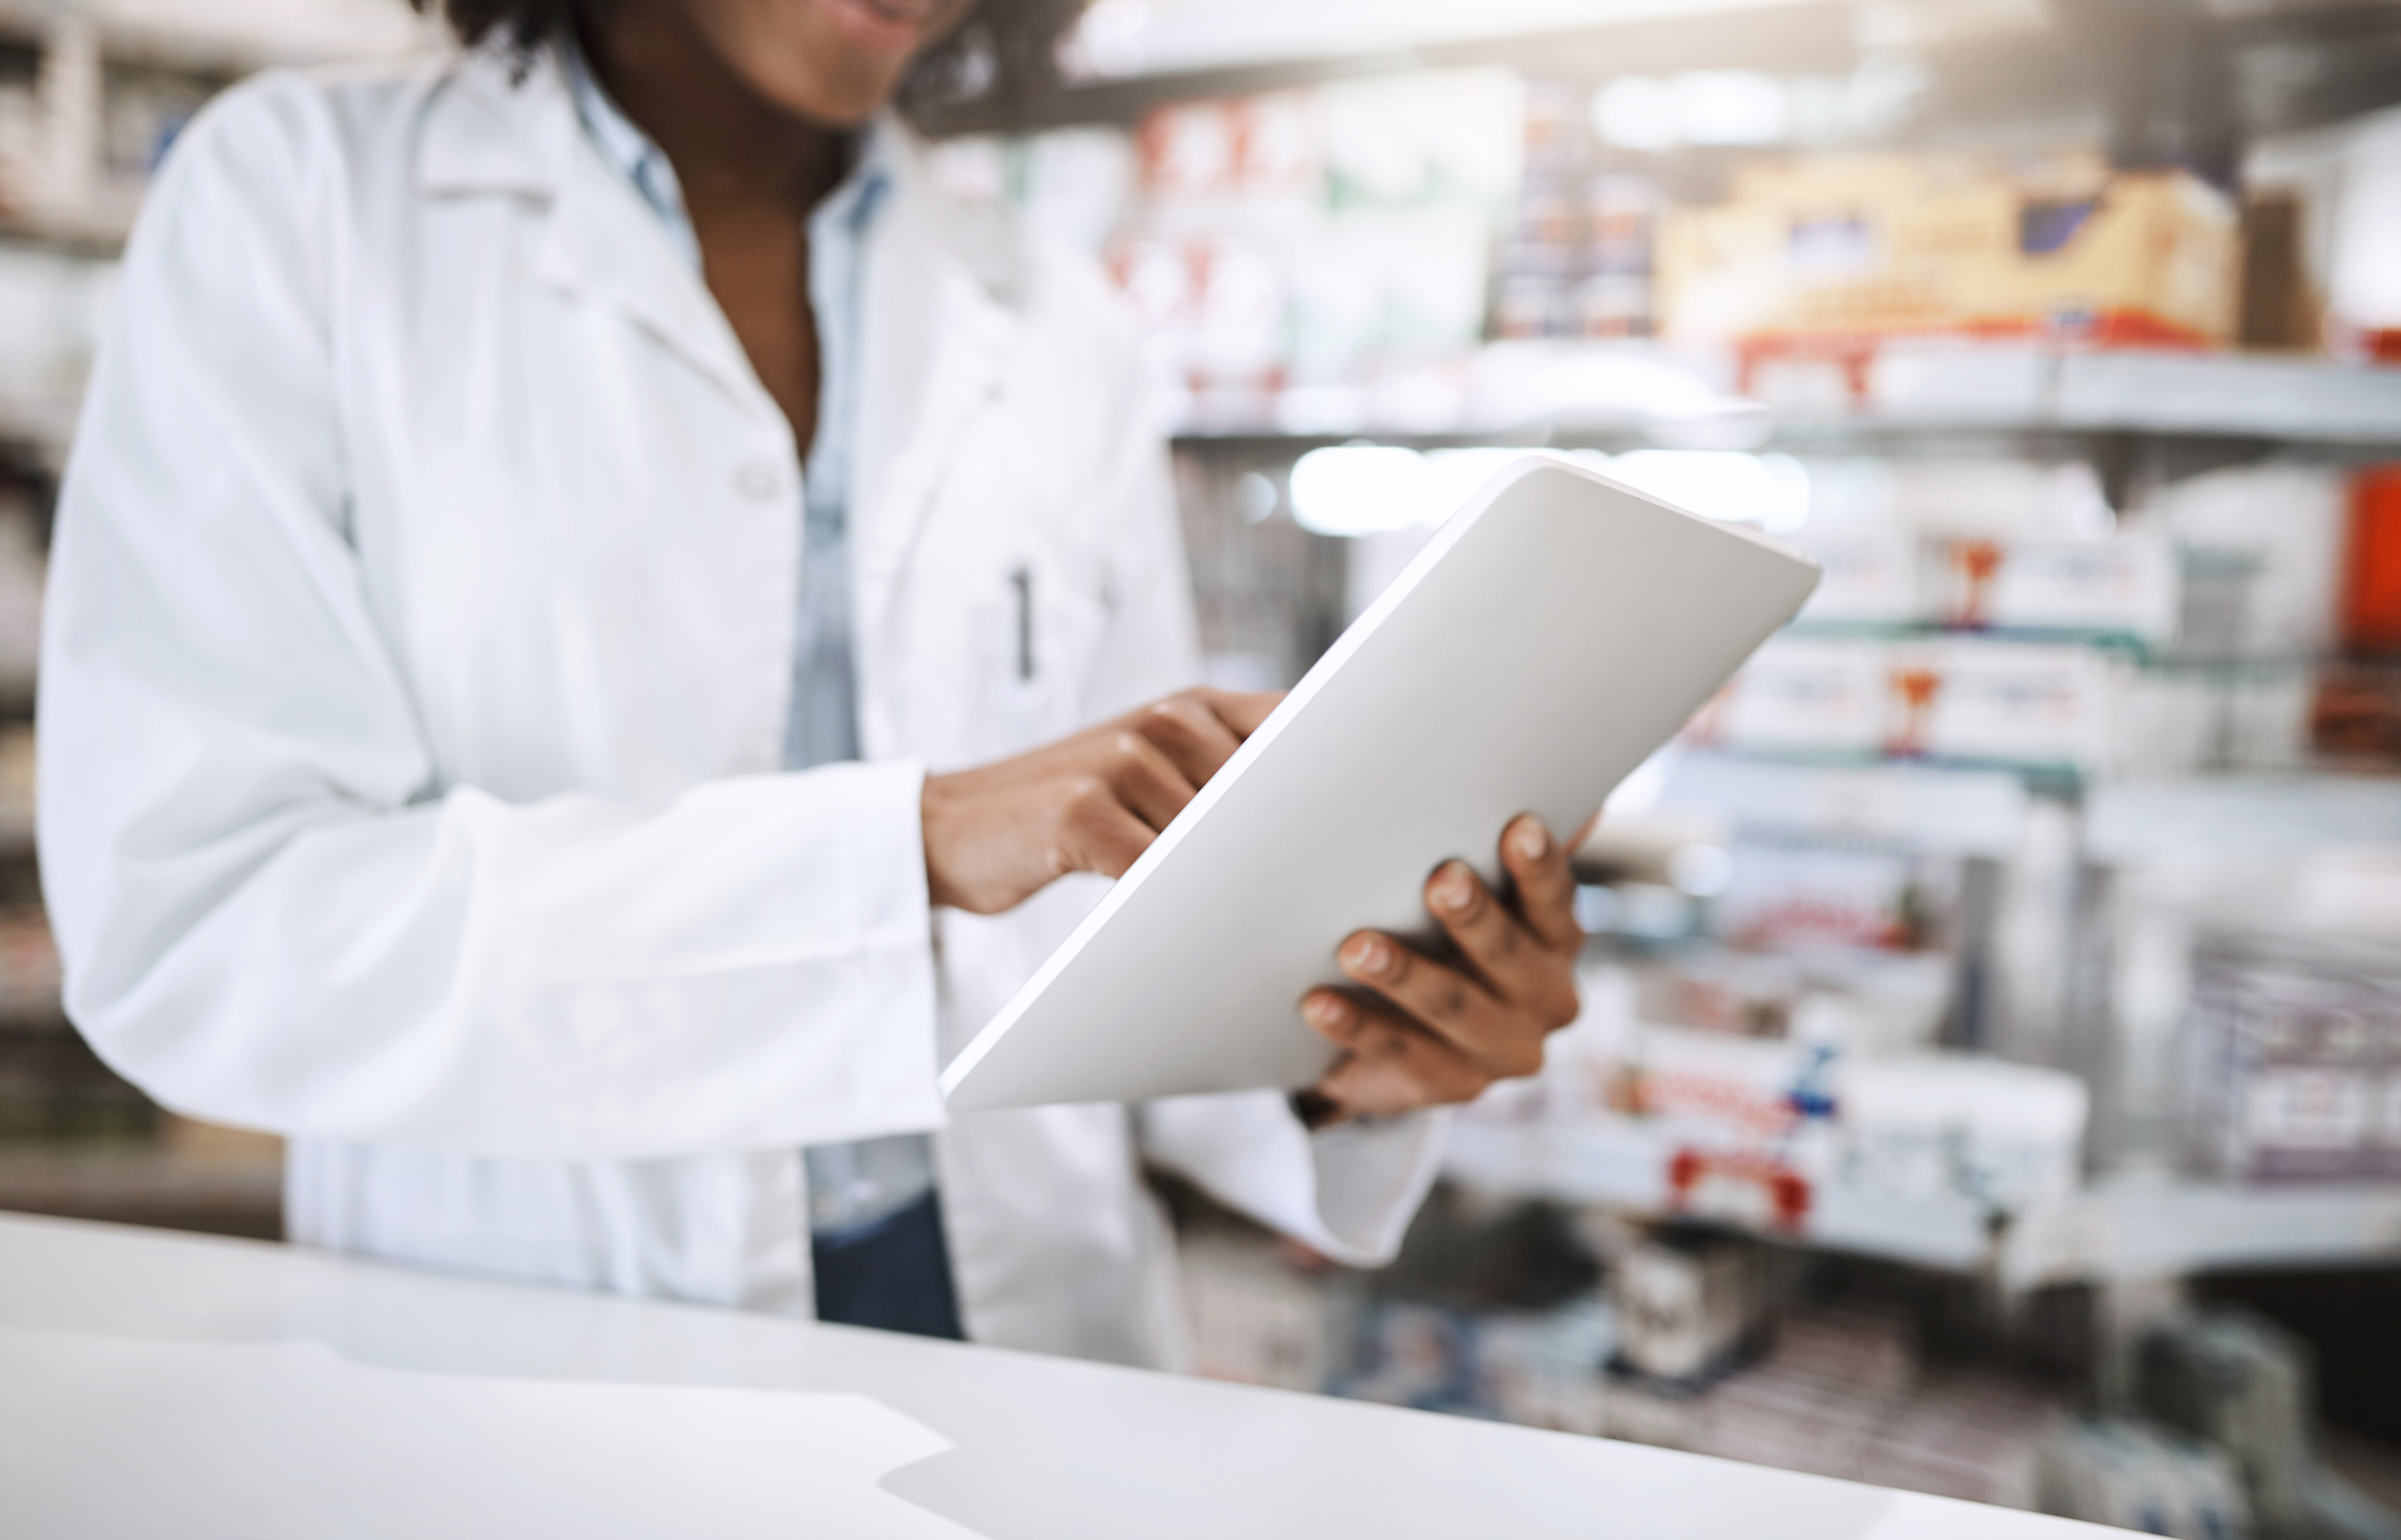 WELL Health Adds PrescribeIT to “apps.health” Marketplace and Launches National e-Prescribing Service with Canada Health Infoway